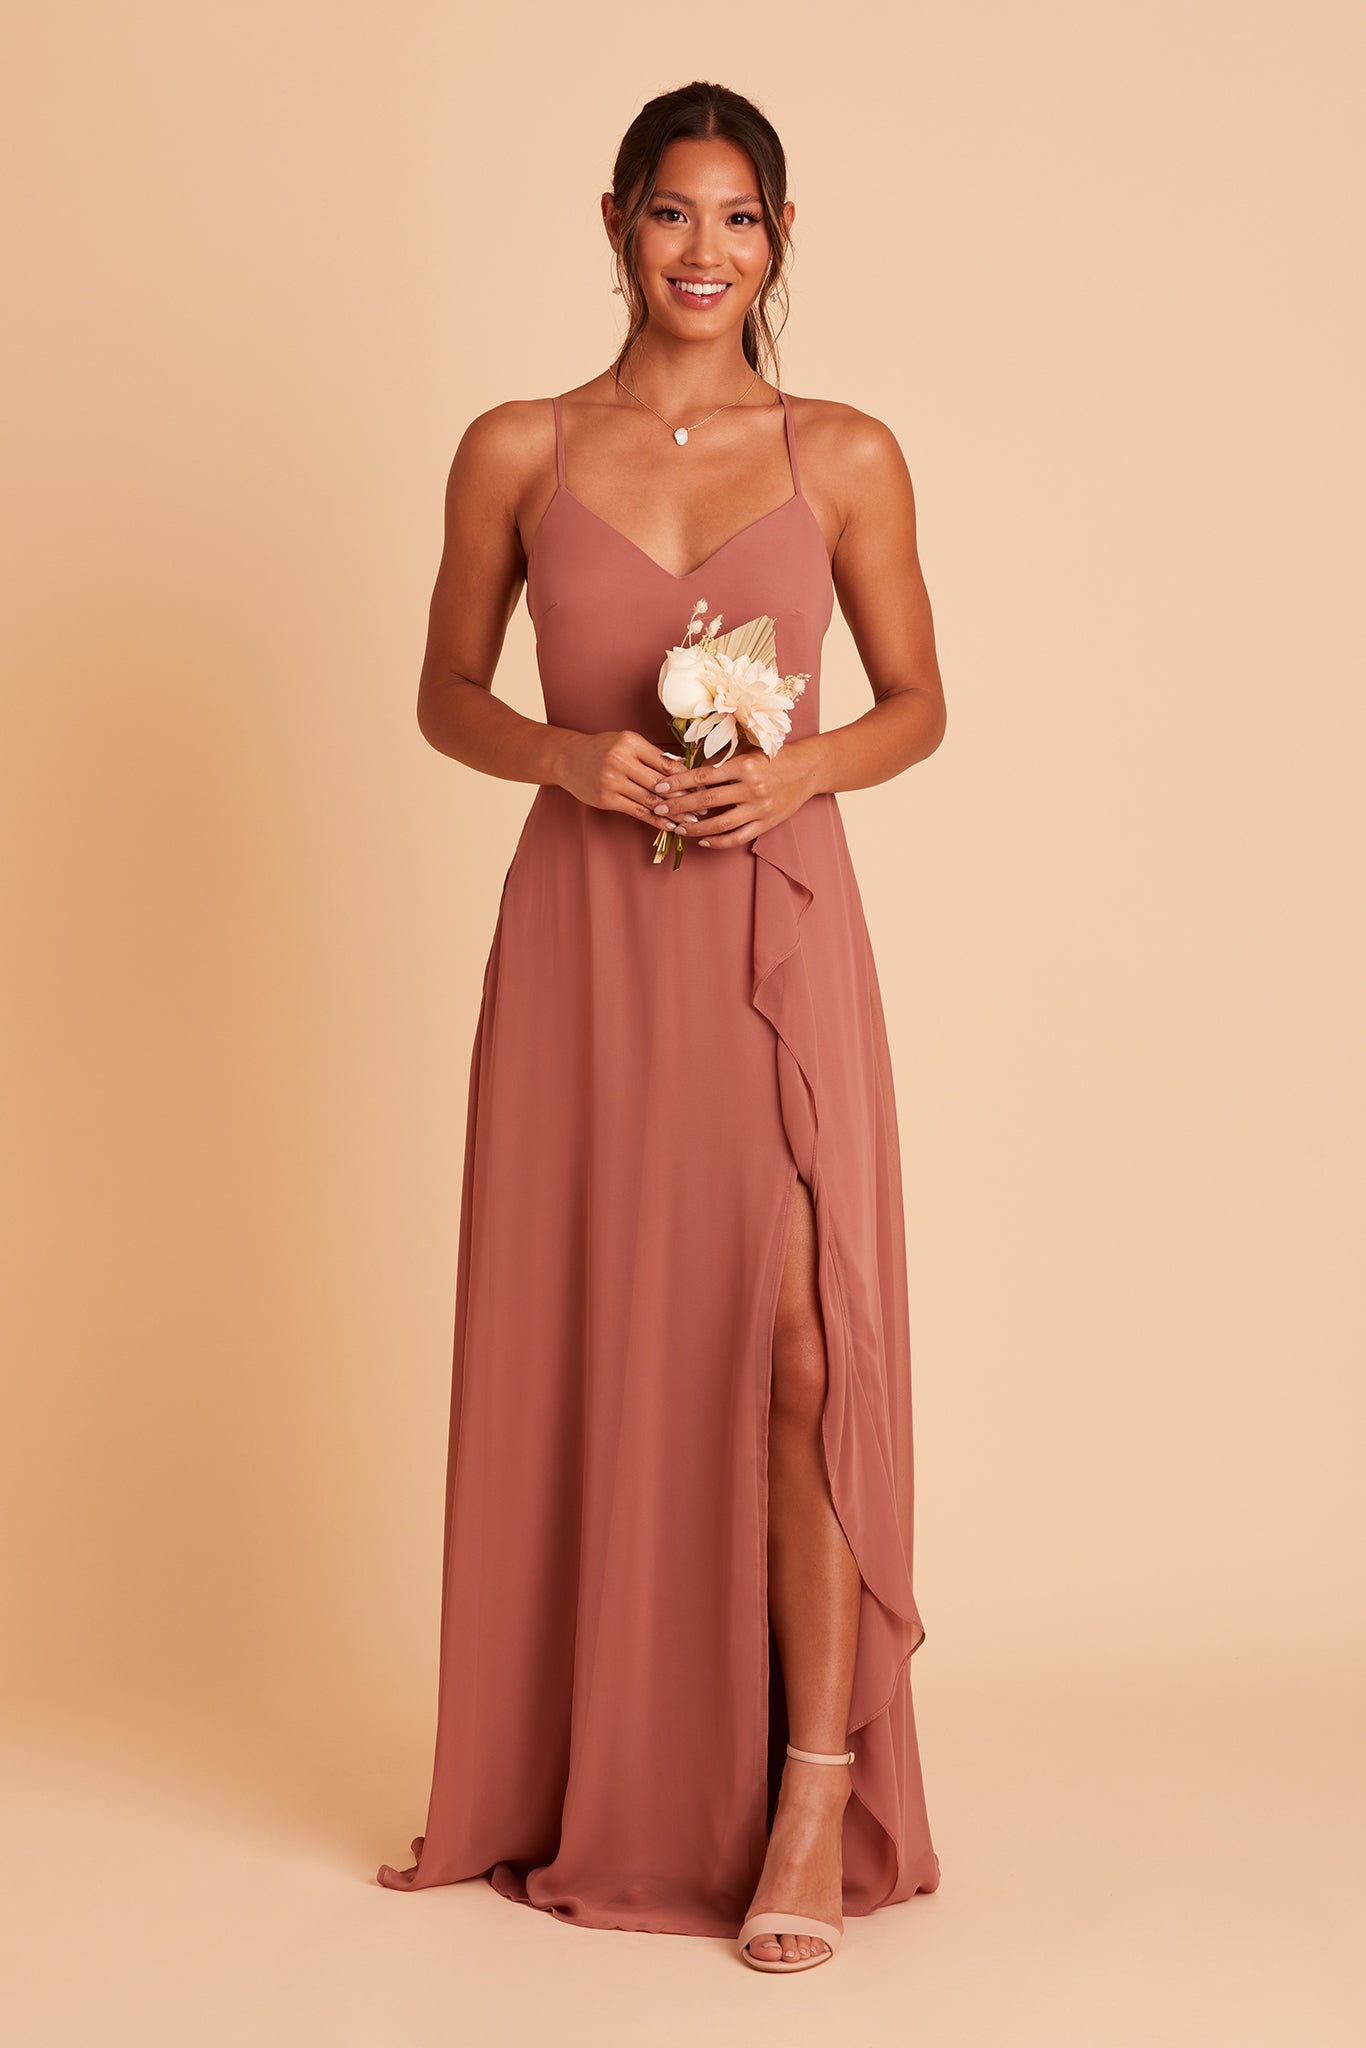 Theresa bridesmaid dress with slit in desert rose chiffon by Birdy Grey, front view